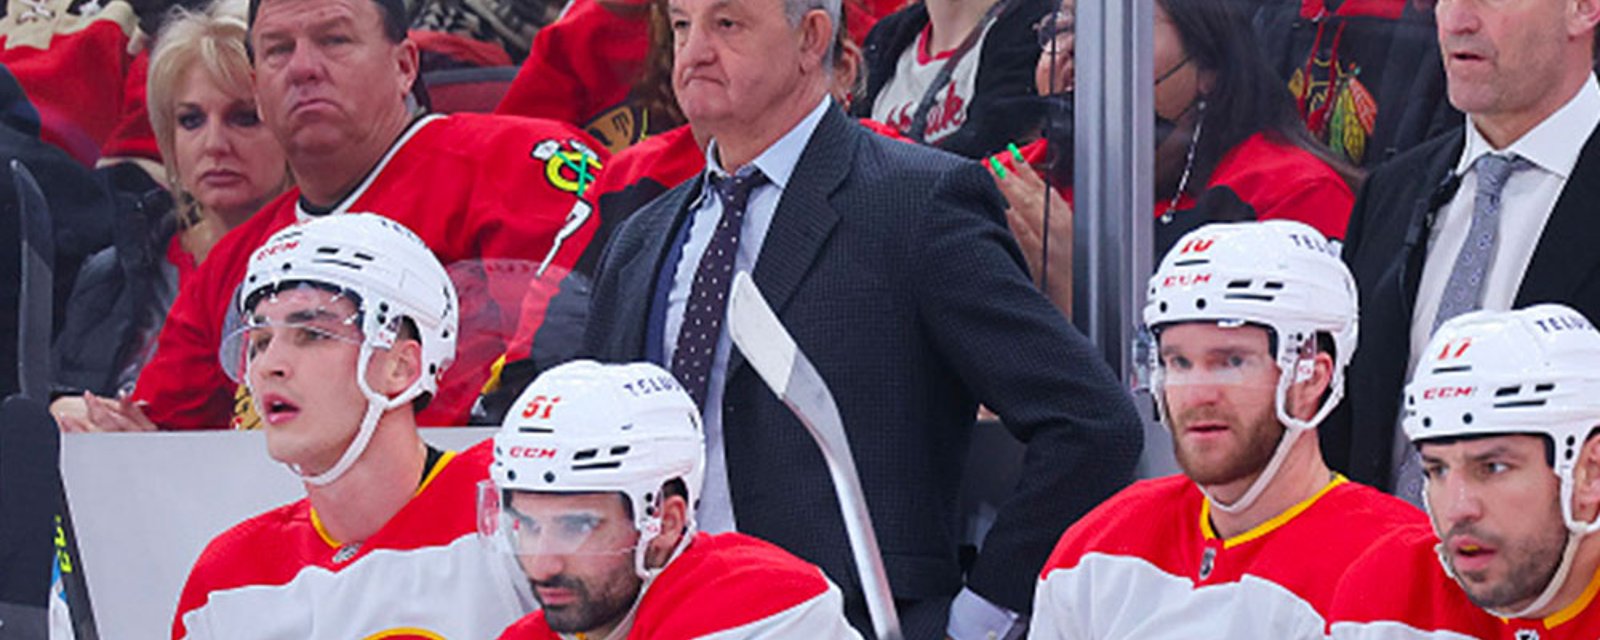 Flames' players “voice their disapproval” at coach Sutter returning for next season